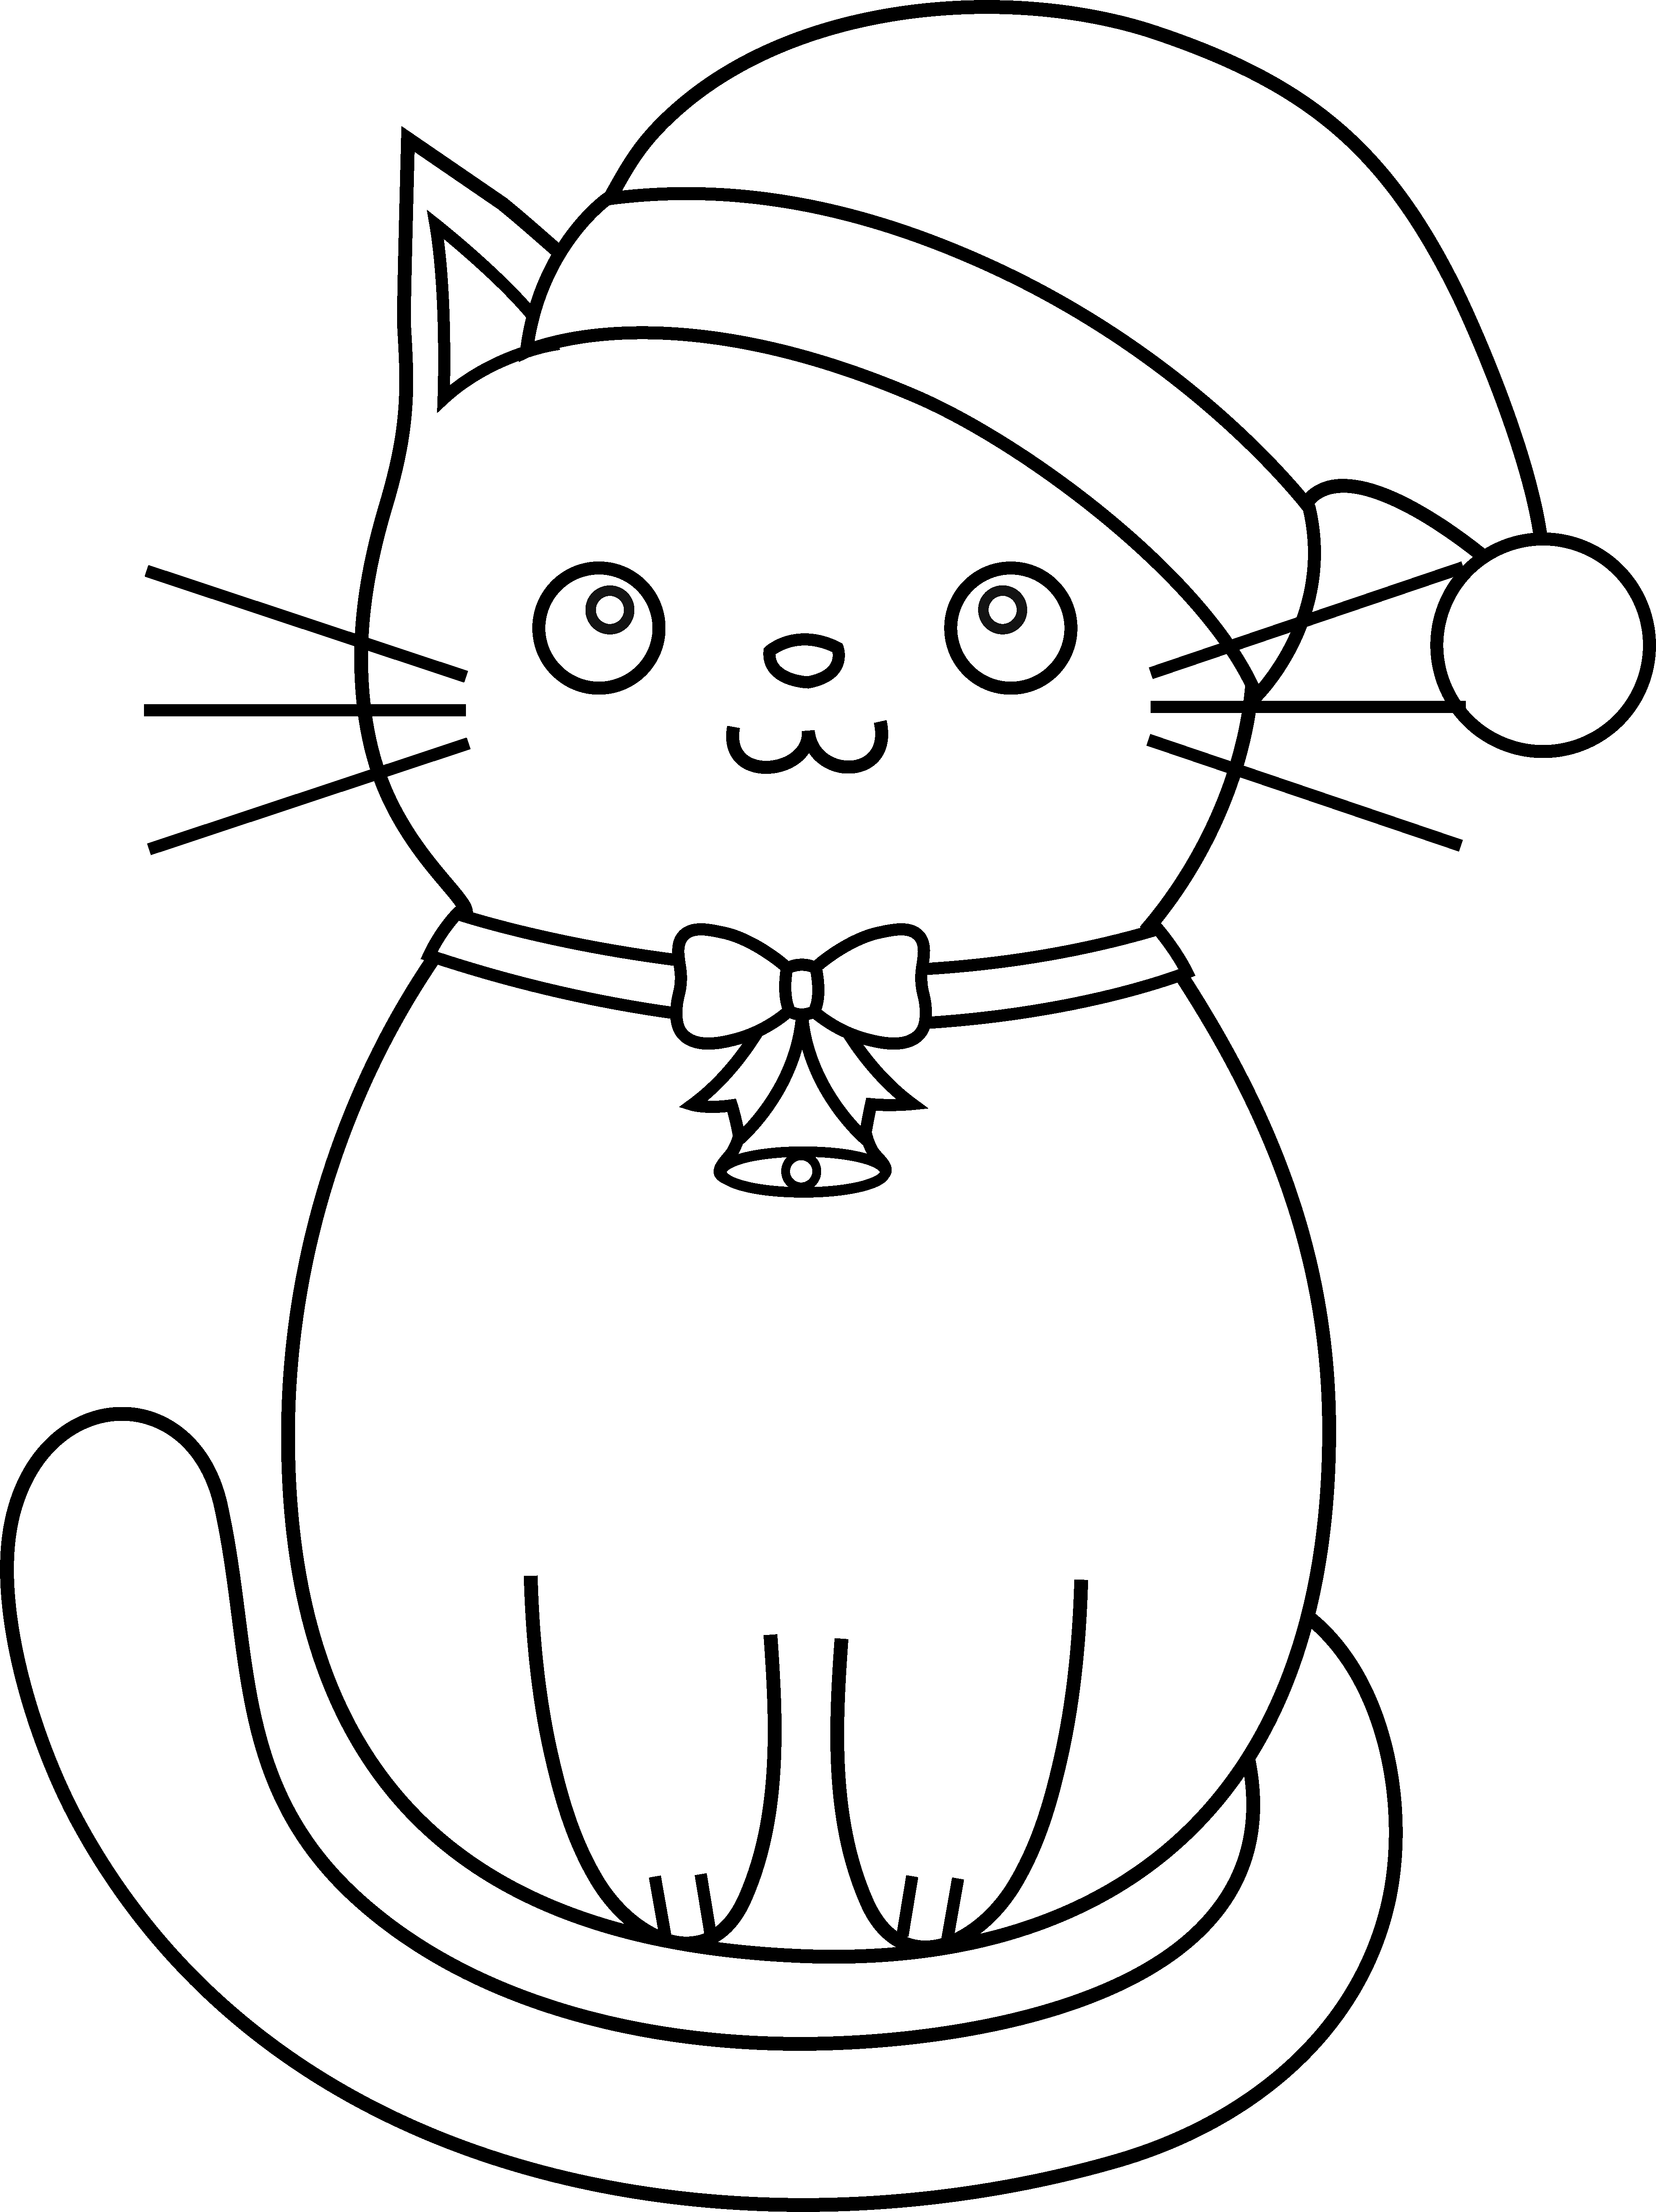 Kitten Coloring Pages Best Coloring Pages For Kids HD Wallpapers Download Free Images Wallpaper [wallpaper896.blogspot.com]